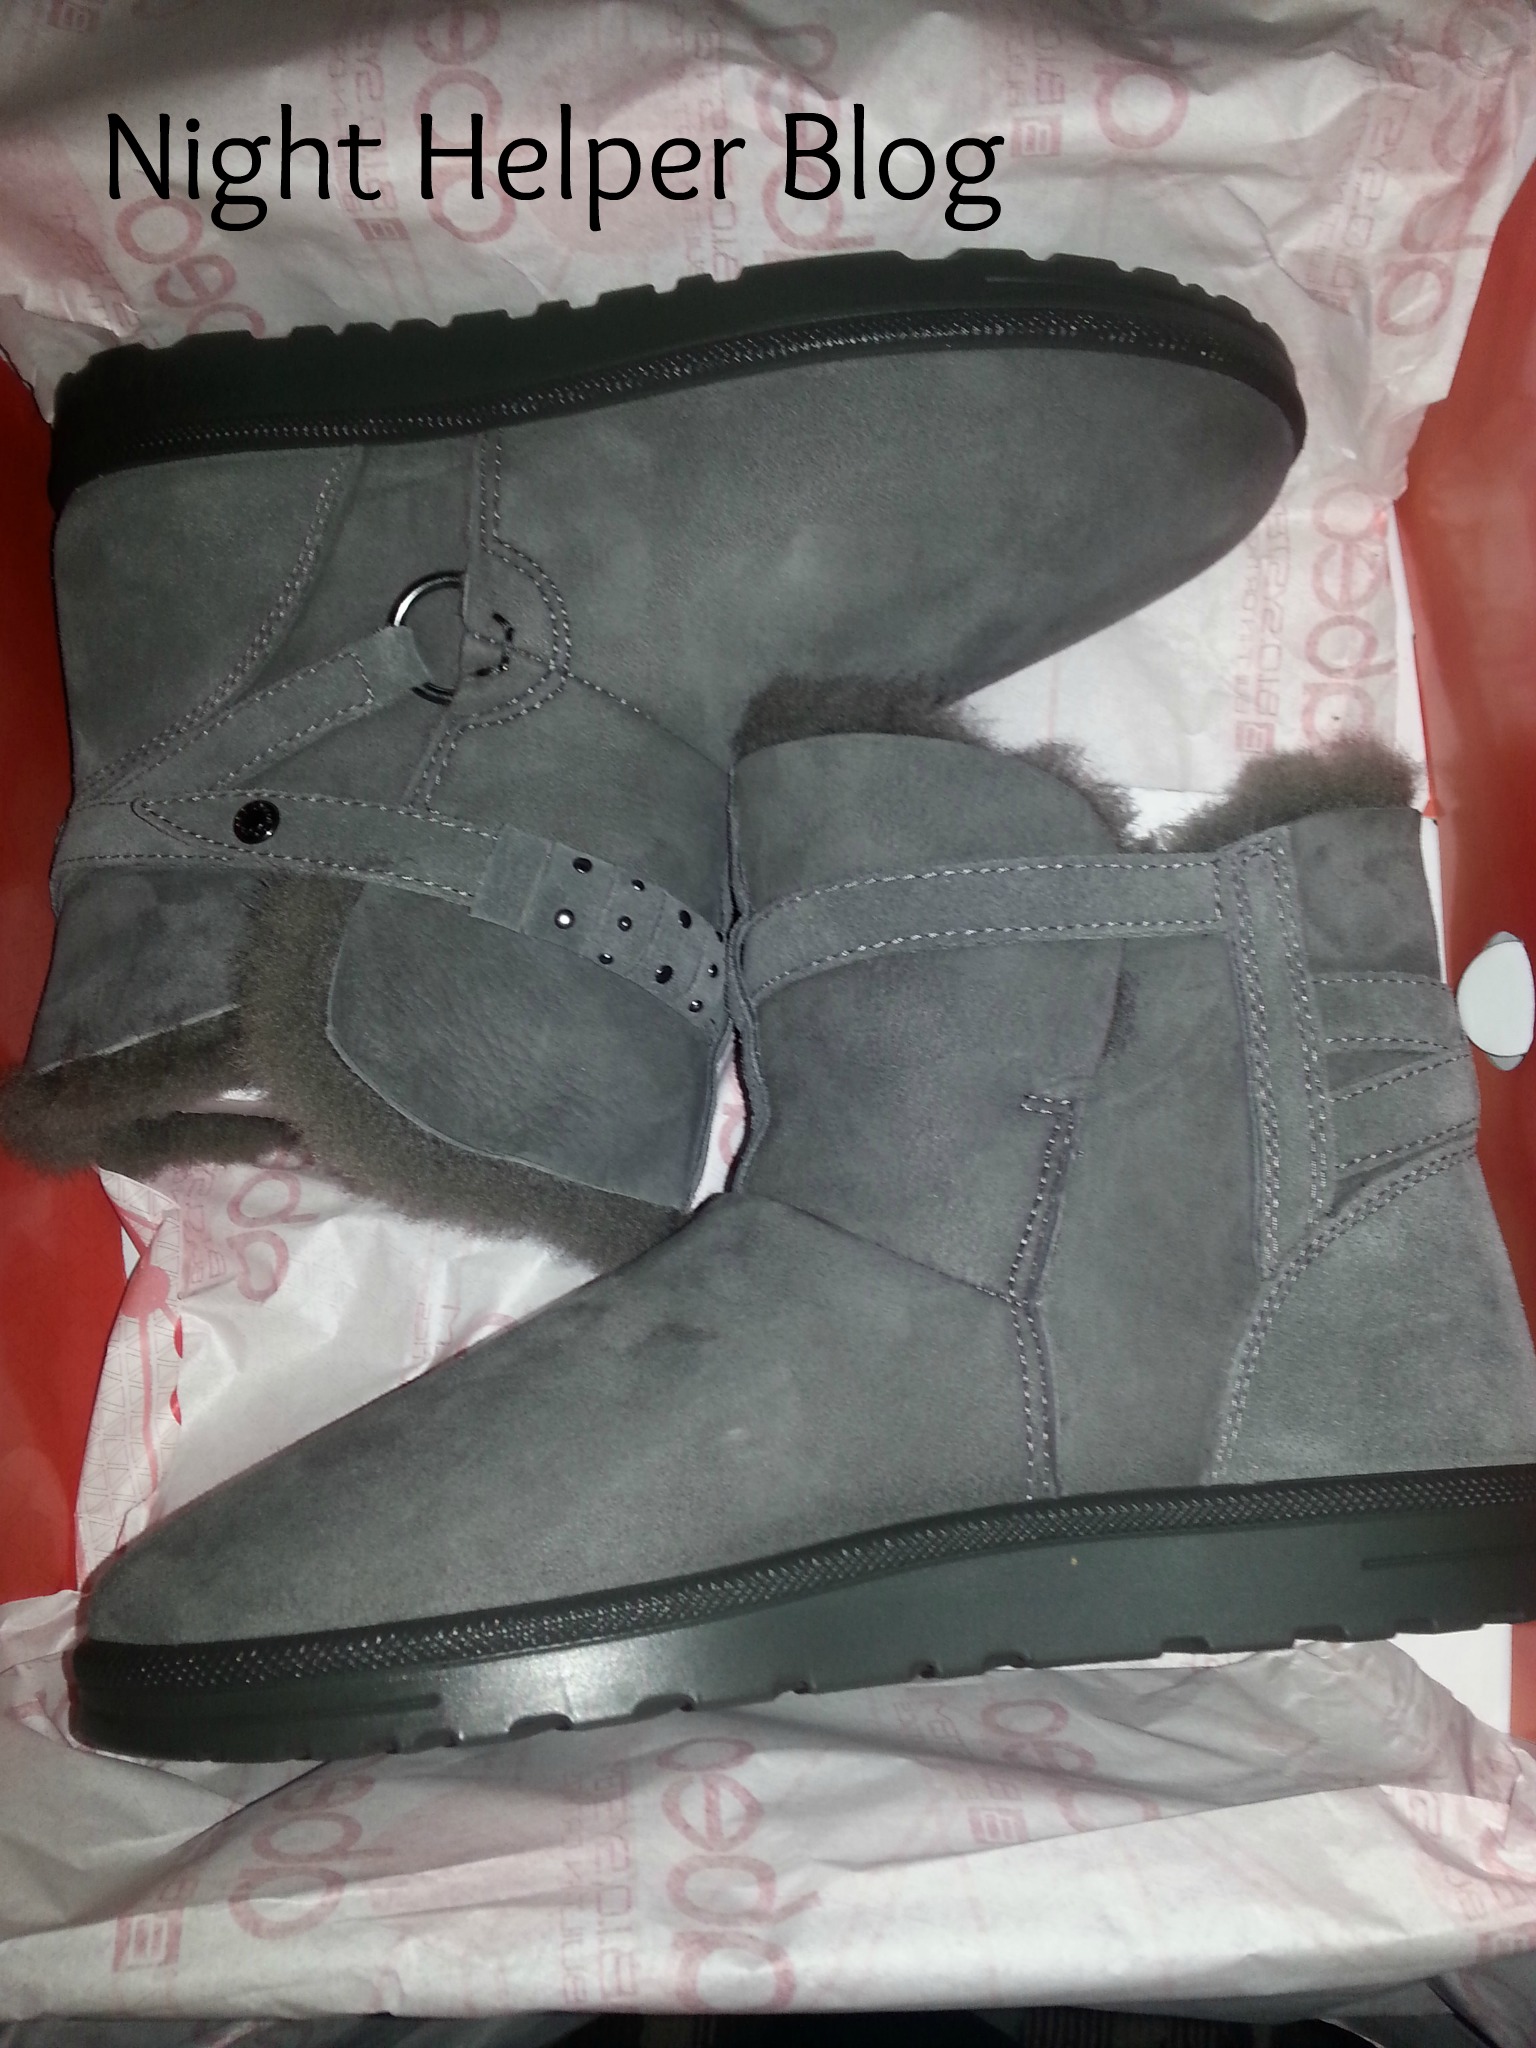 abeo winter boots